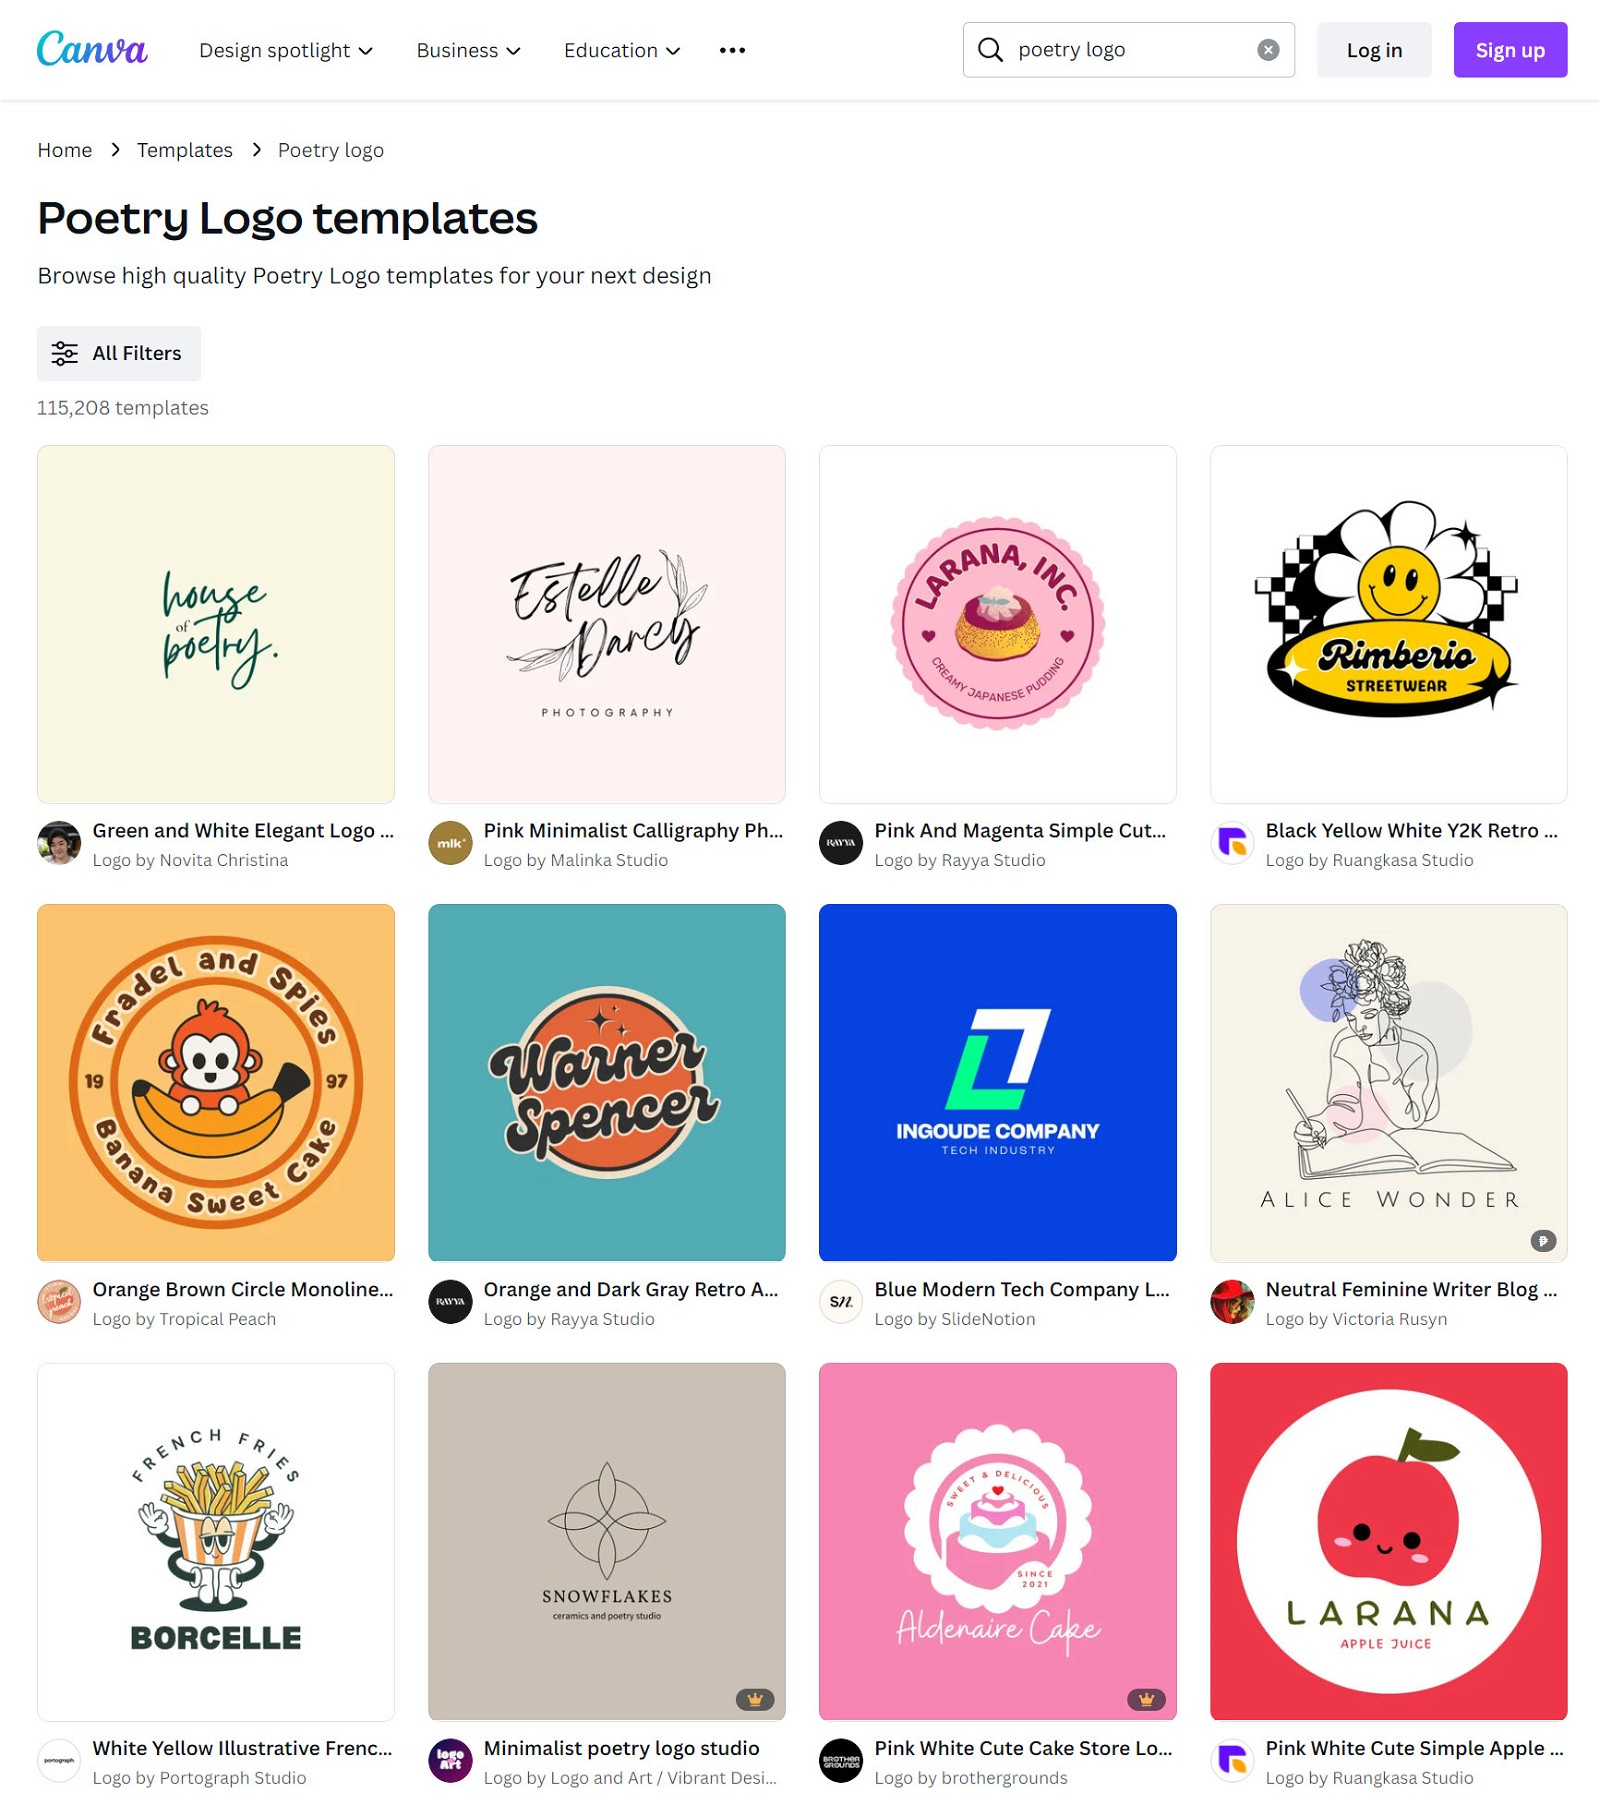 poetry logos on canva